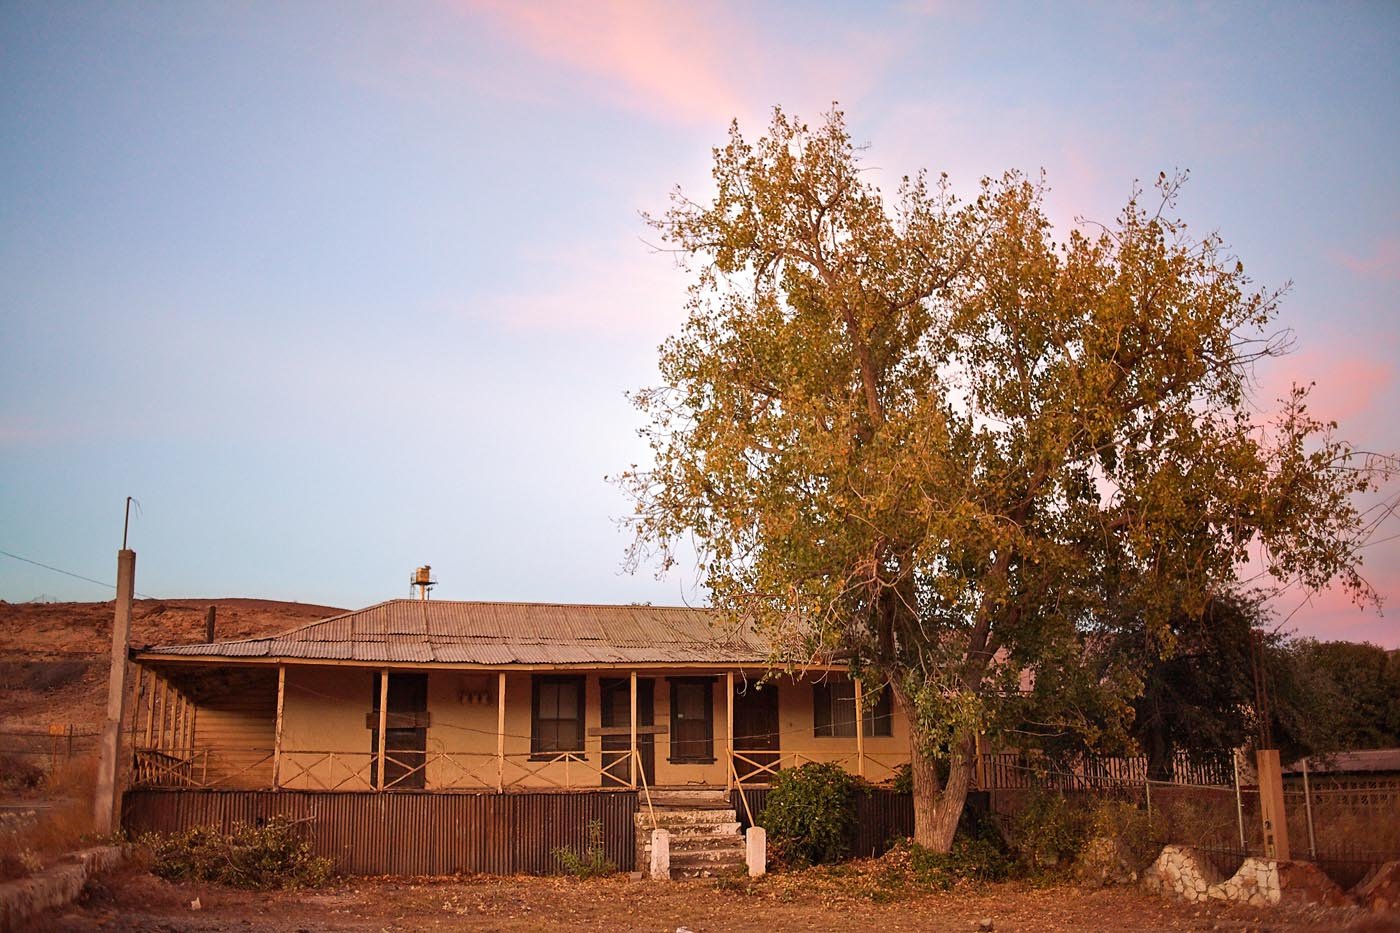 House at Sunset. Cananea, Sonora. Mexico.